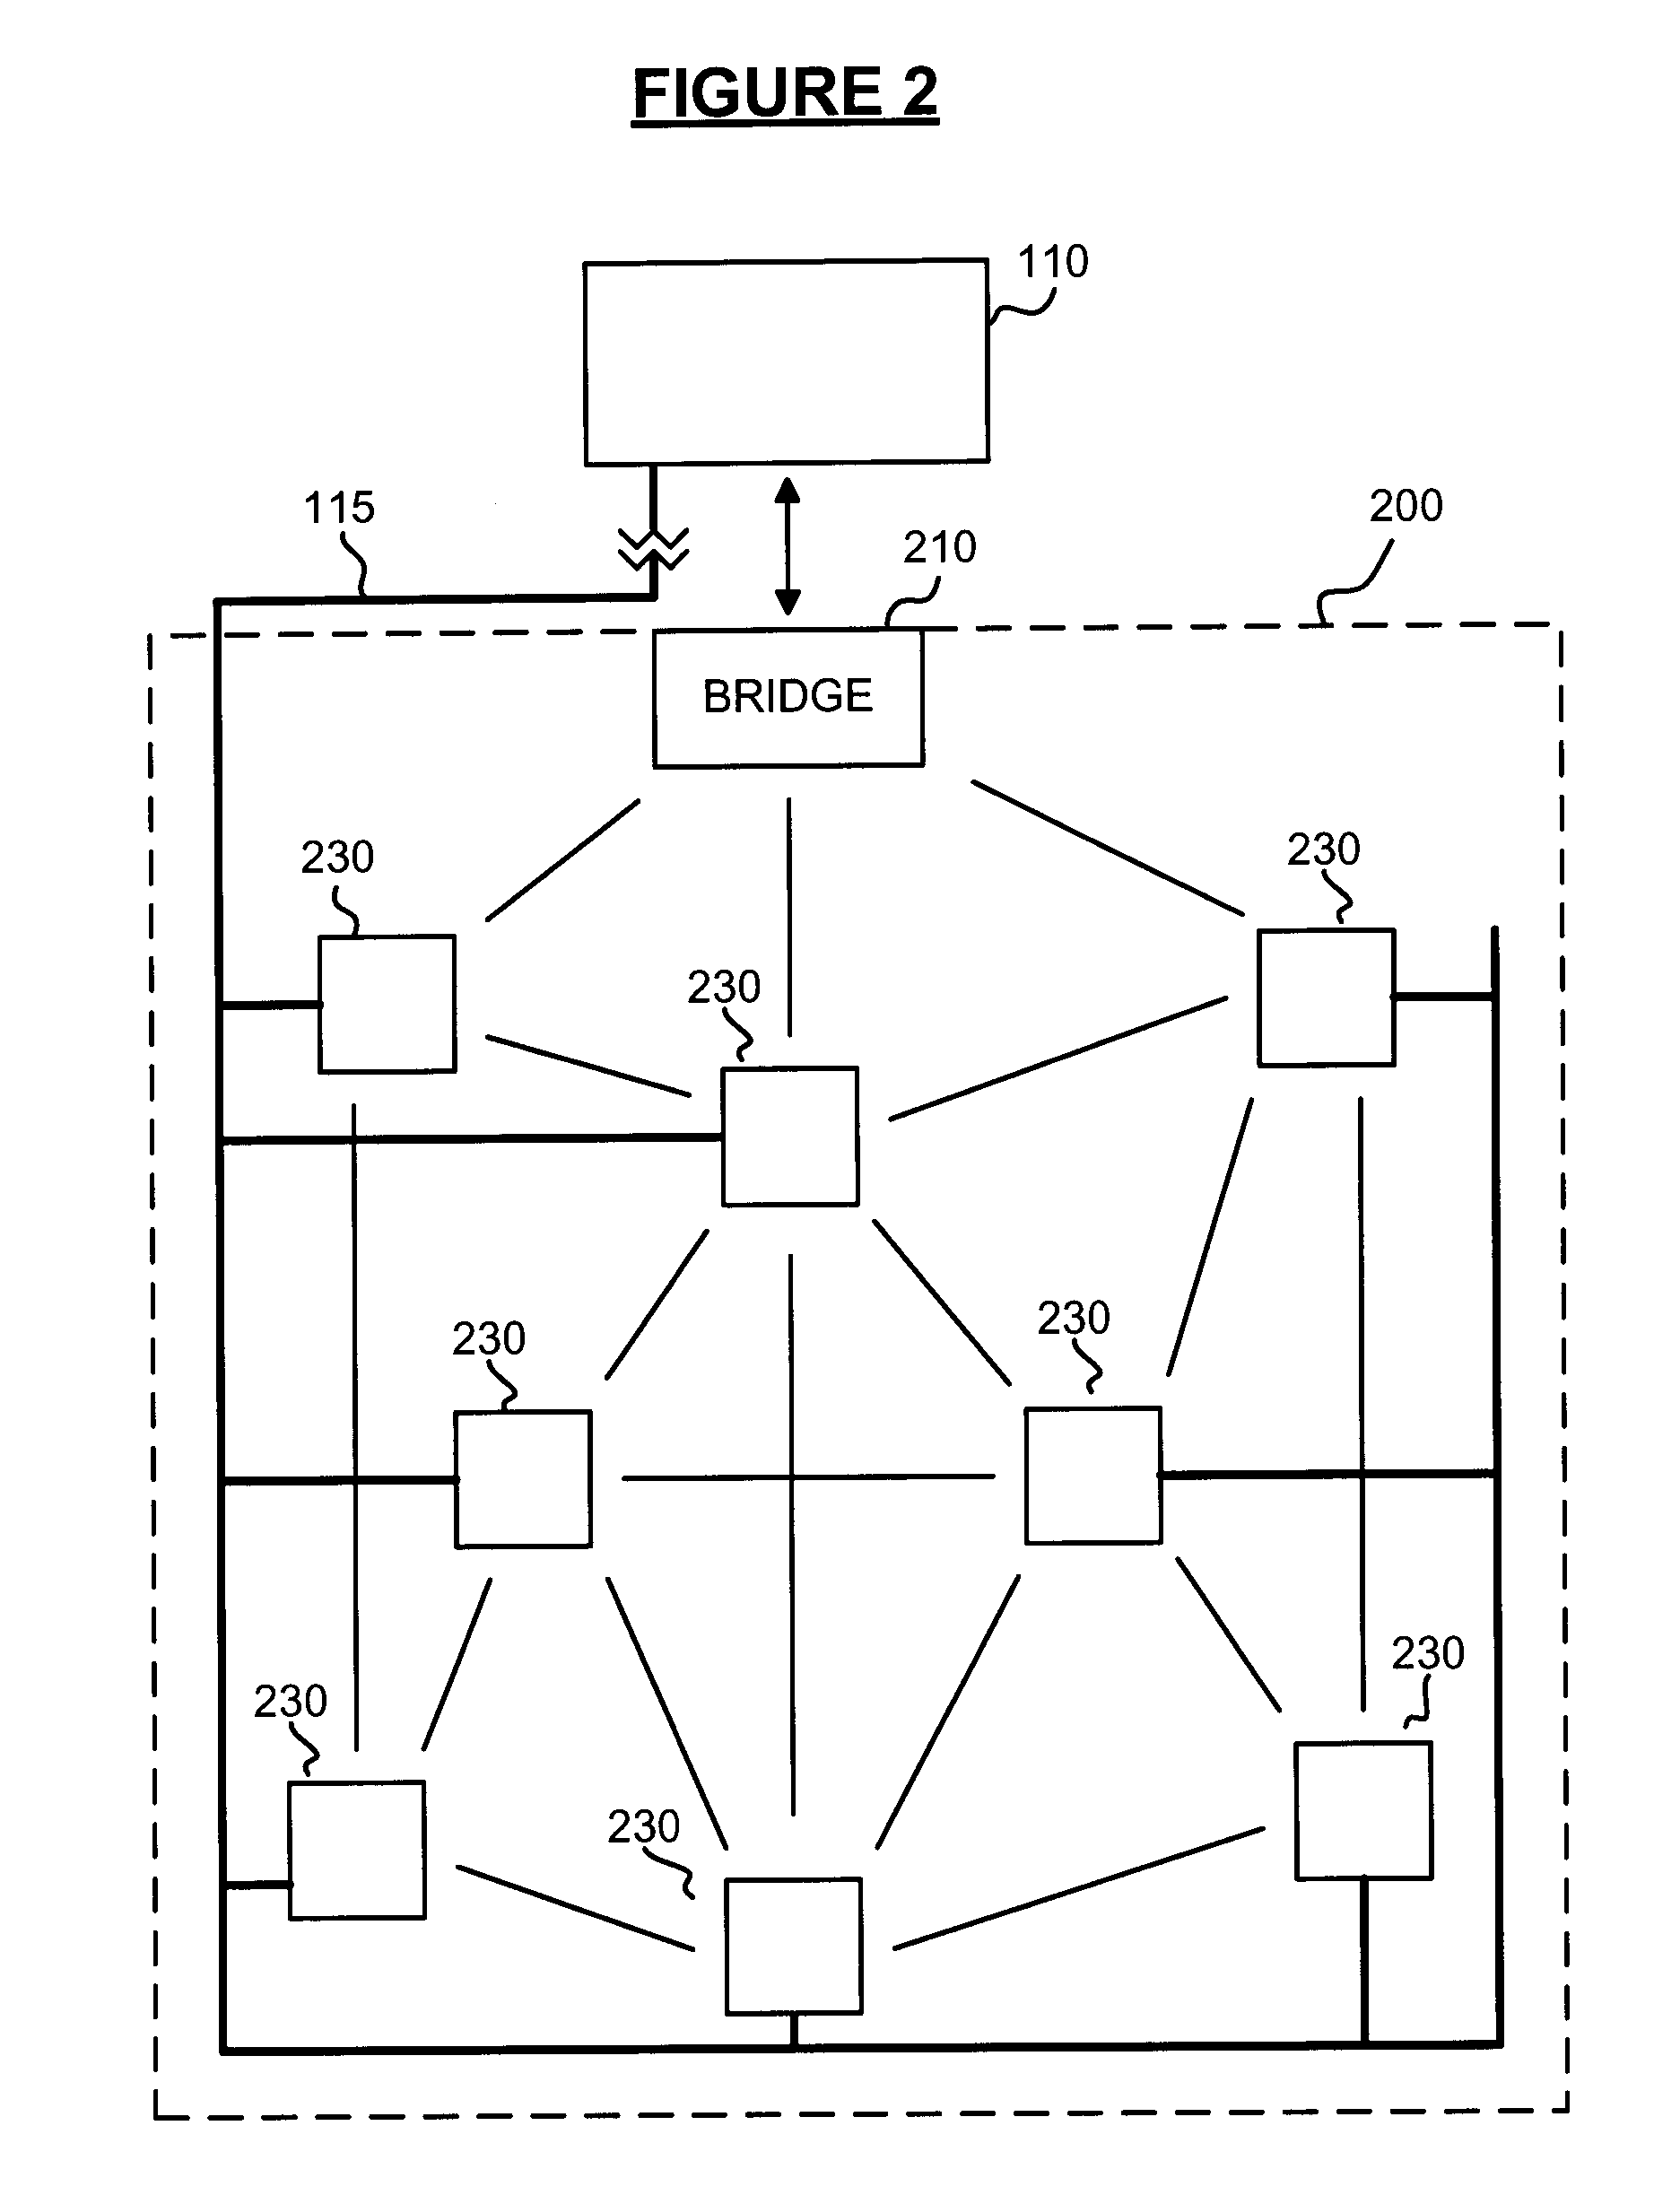 Systems and Methods for Generating Power Through The Flow of Water